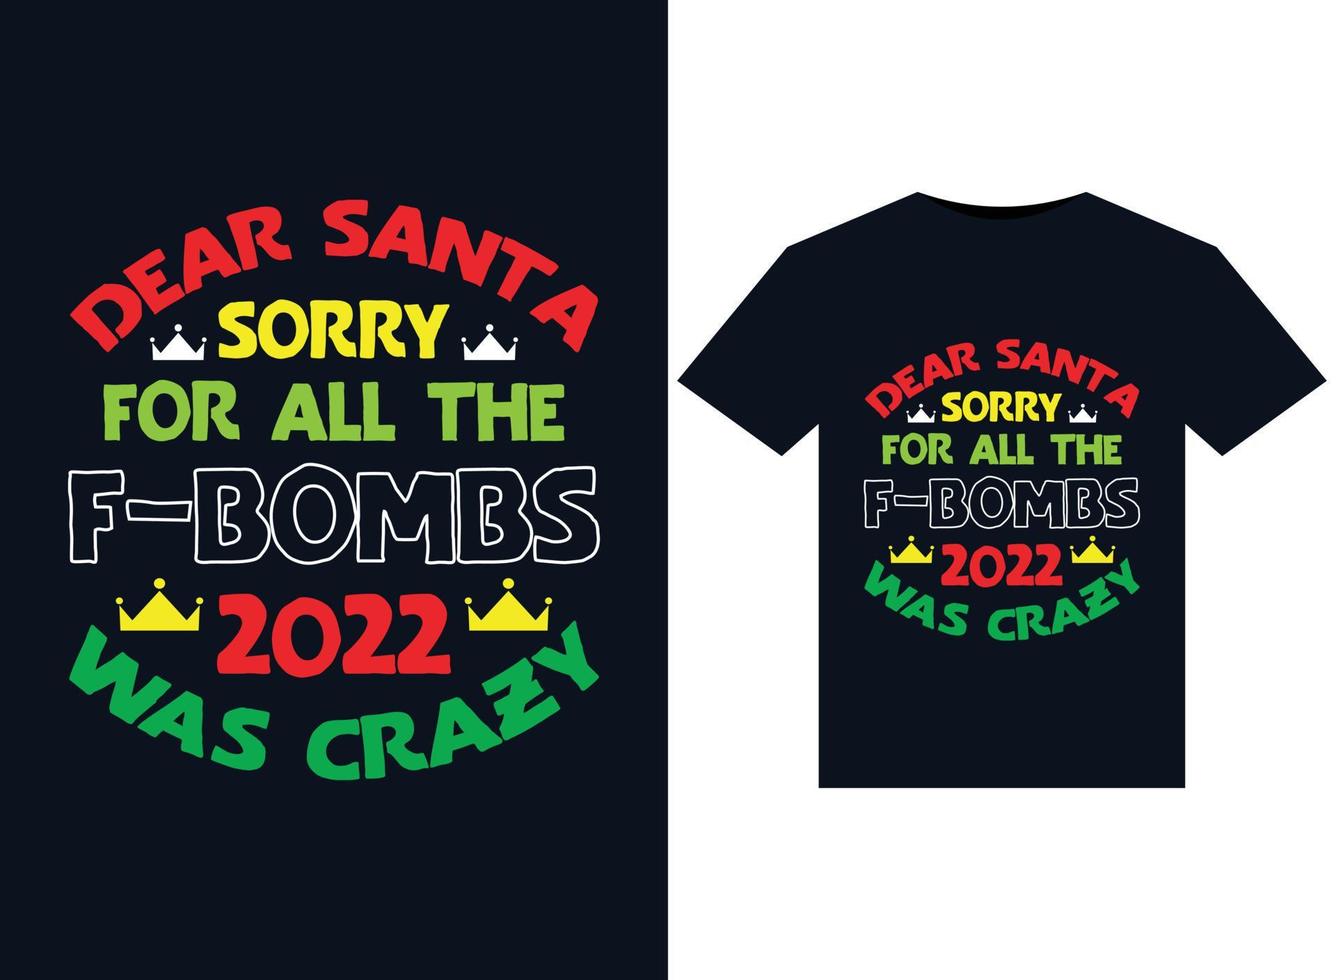 Dear Santa Sorry For All The F-bombs 2022 Was Crazy illustrations for print-ready T-Shirts design vector